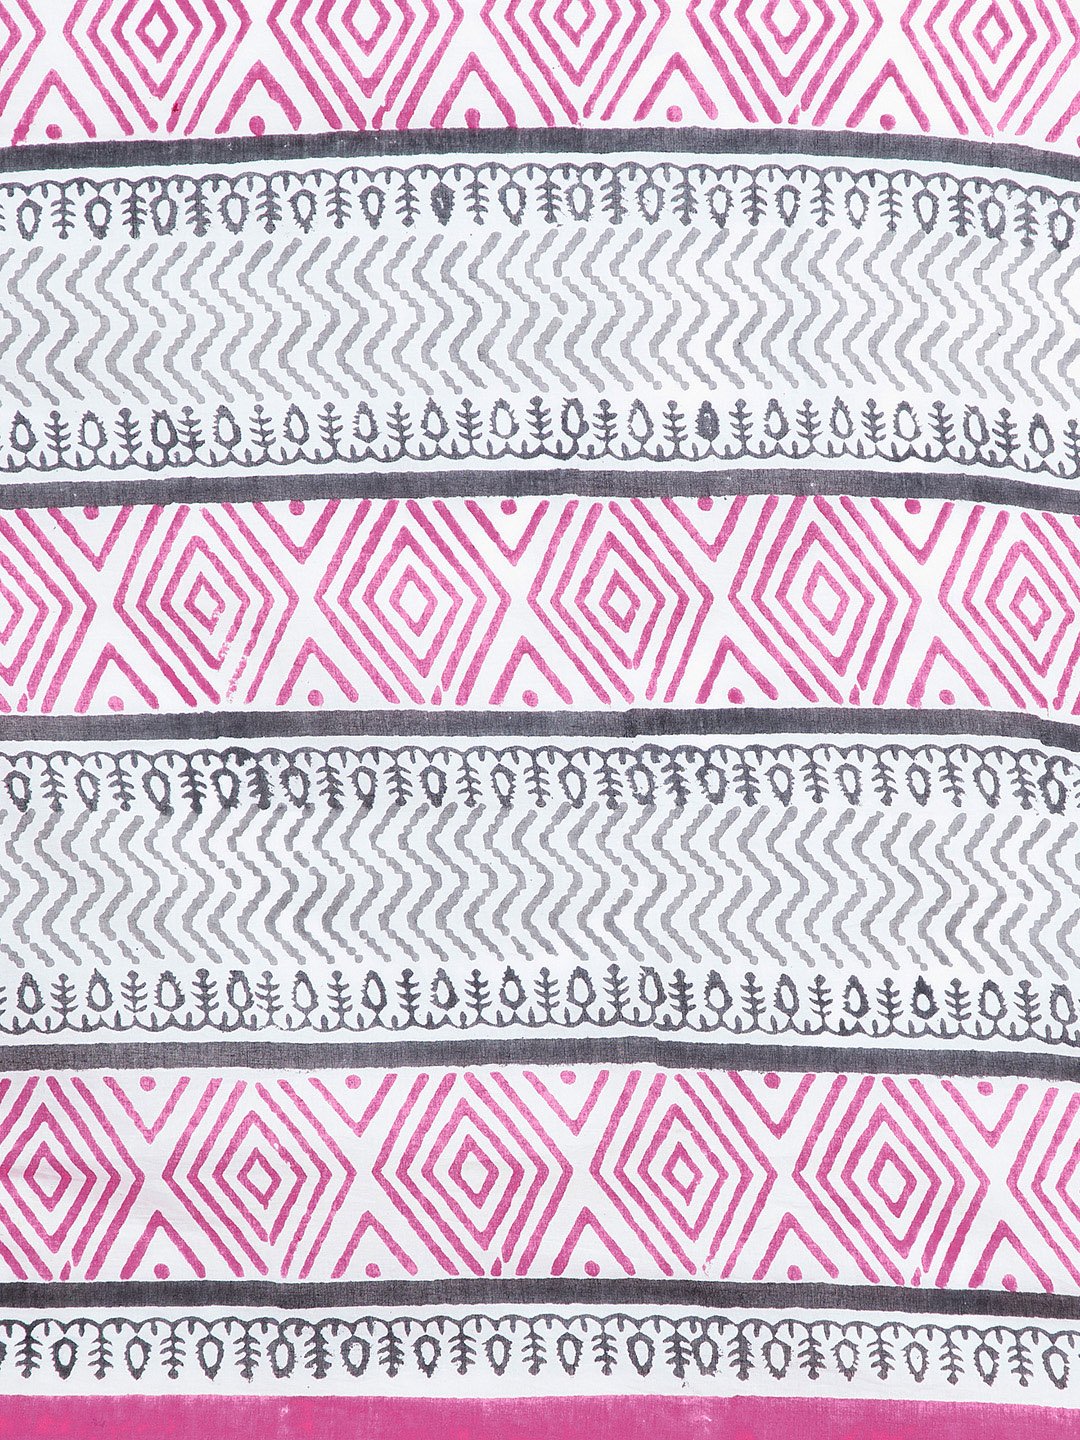 White & Pink Mughal Hand Block Print Handcrafted Cotton Saree-Saree-Kalakari India-BHKPSA0020-Cotton, Geographical Indication, Hand Blocks, Hand Crafted, Heritage Prints, Sanganeri, Sarees, Sustainable Fabrics-[Linen,Ethnic,wear,Fashionista,Handloom,Handicraft,Indigo,blockprint,block,print,Cotton,Chanderi,Blue, latest,classy,party,bollywood,trendy,summer,style,traditional,formal,elegant,unique,style,hand,block,print, dabu,booti,gift,present,glamorous,affordable,collectible,Sari,Saree,printed, ho